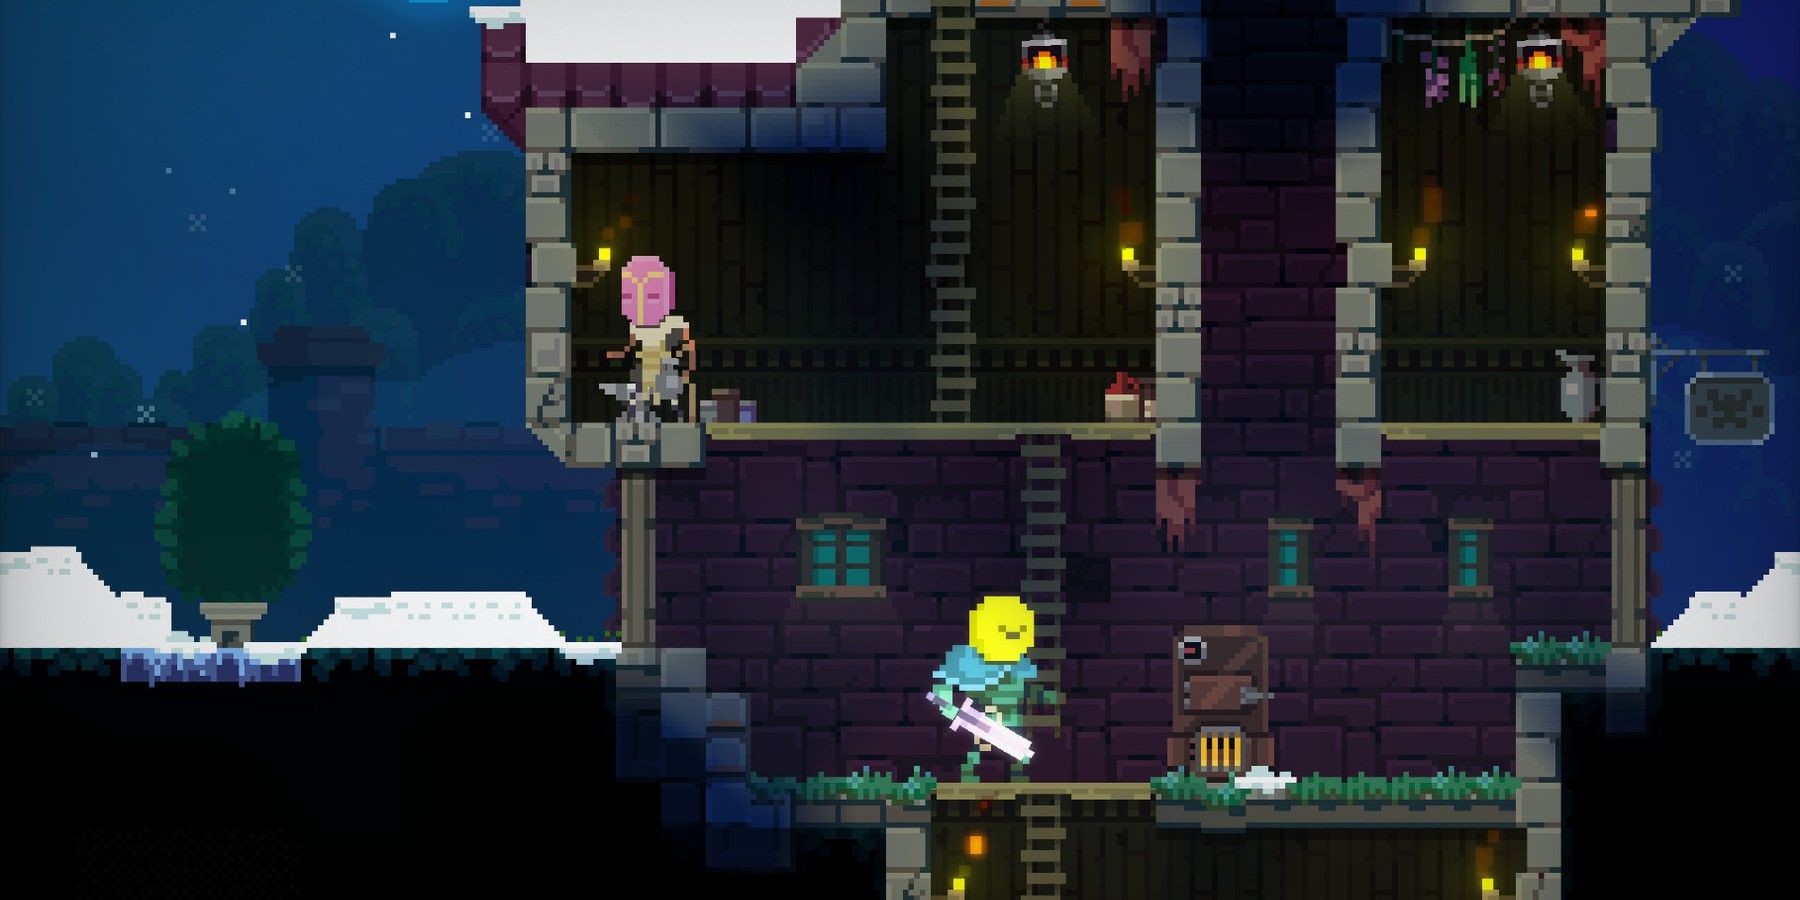 Moonquest gameplay small fortress interior on wintery night